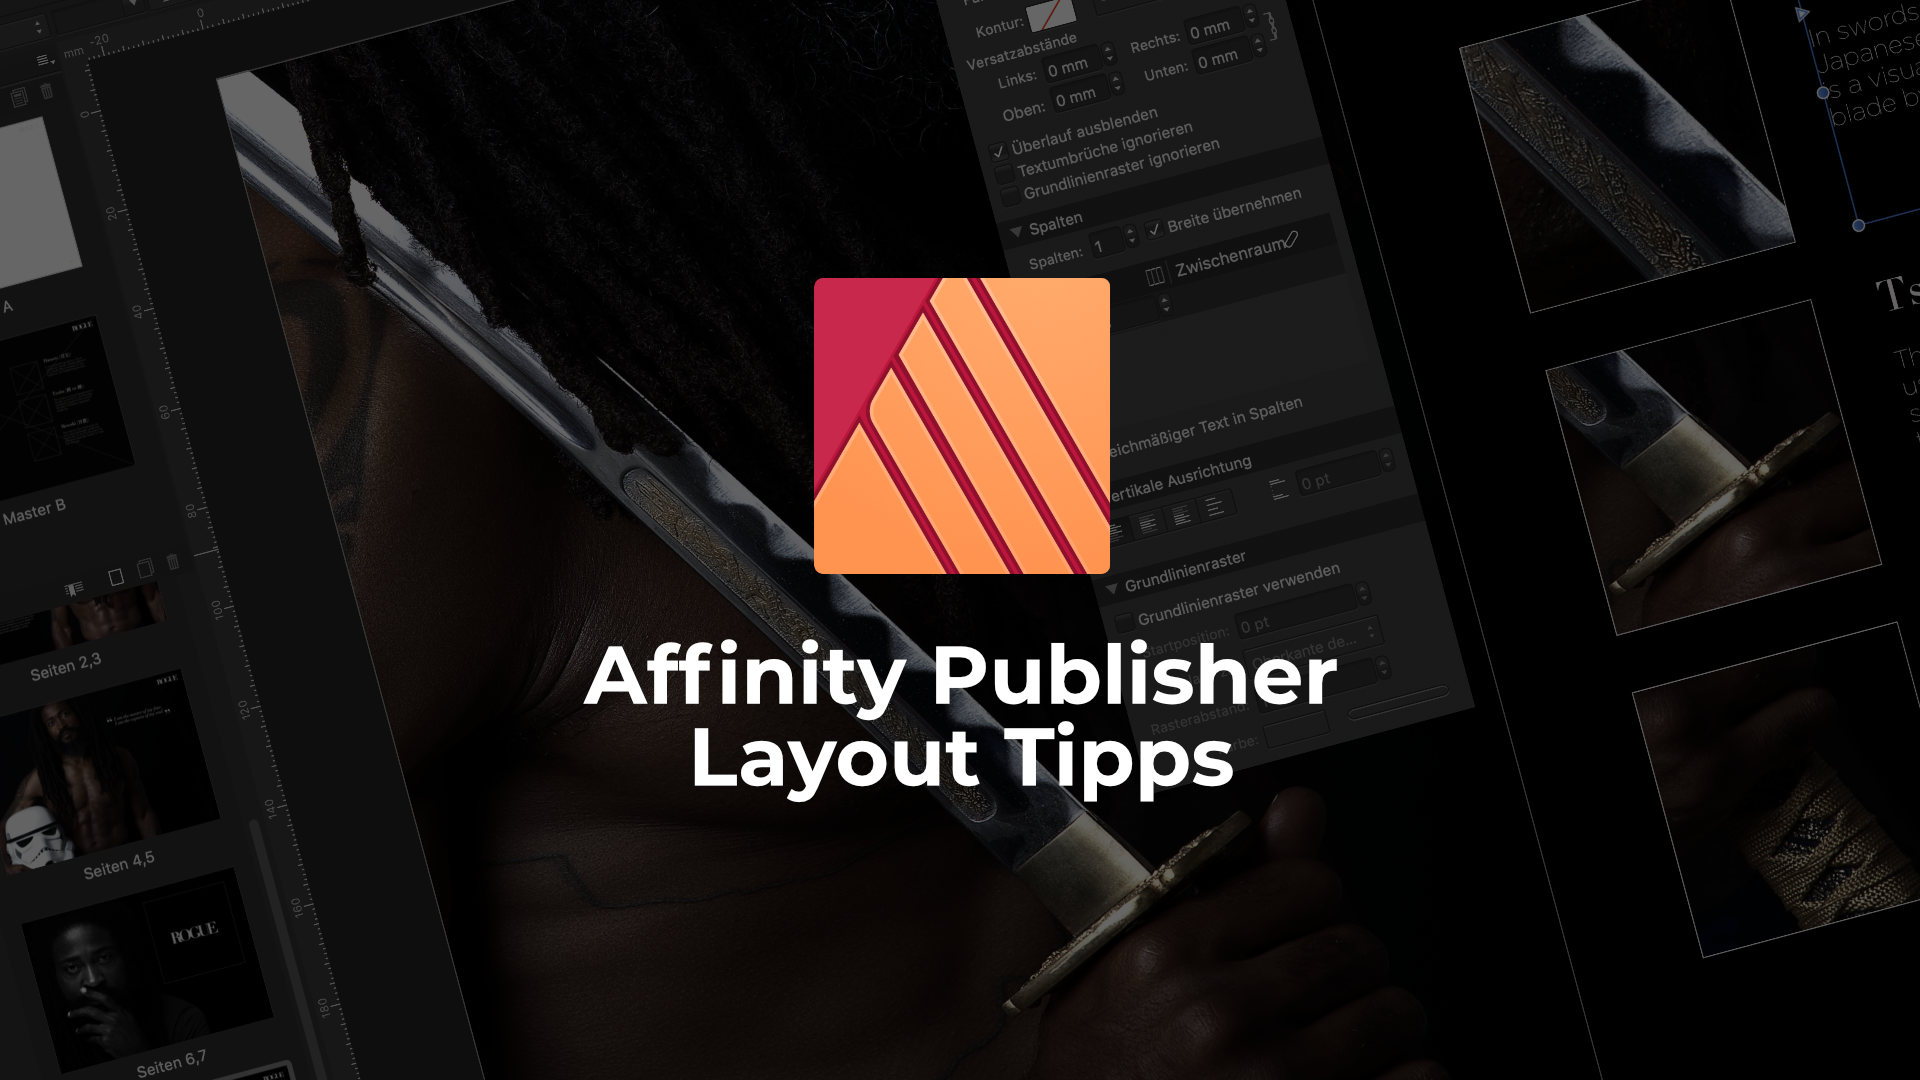 download the last version for iphoneSerif Affinity Publisher 2.2.0.2005